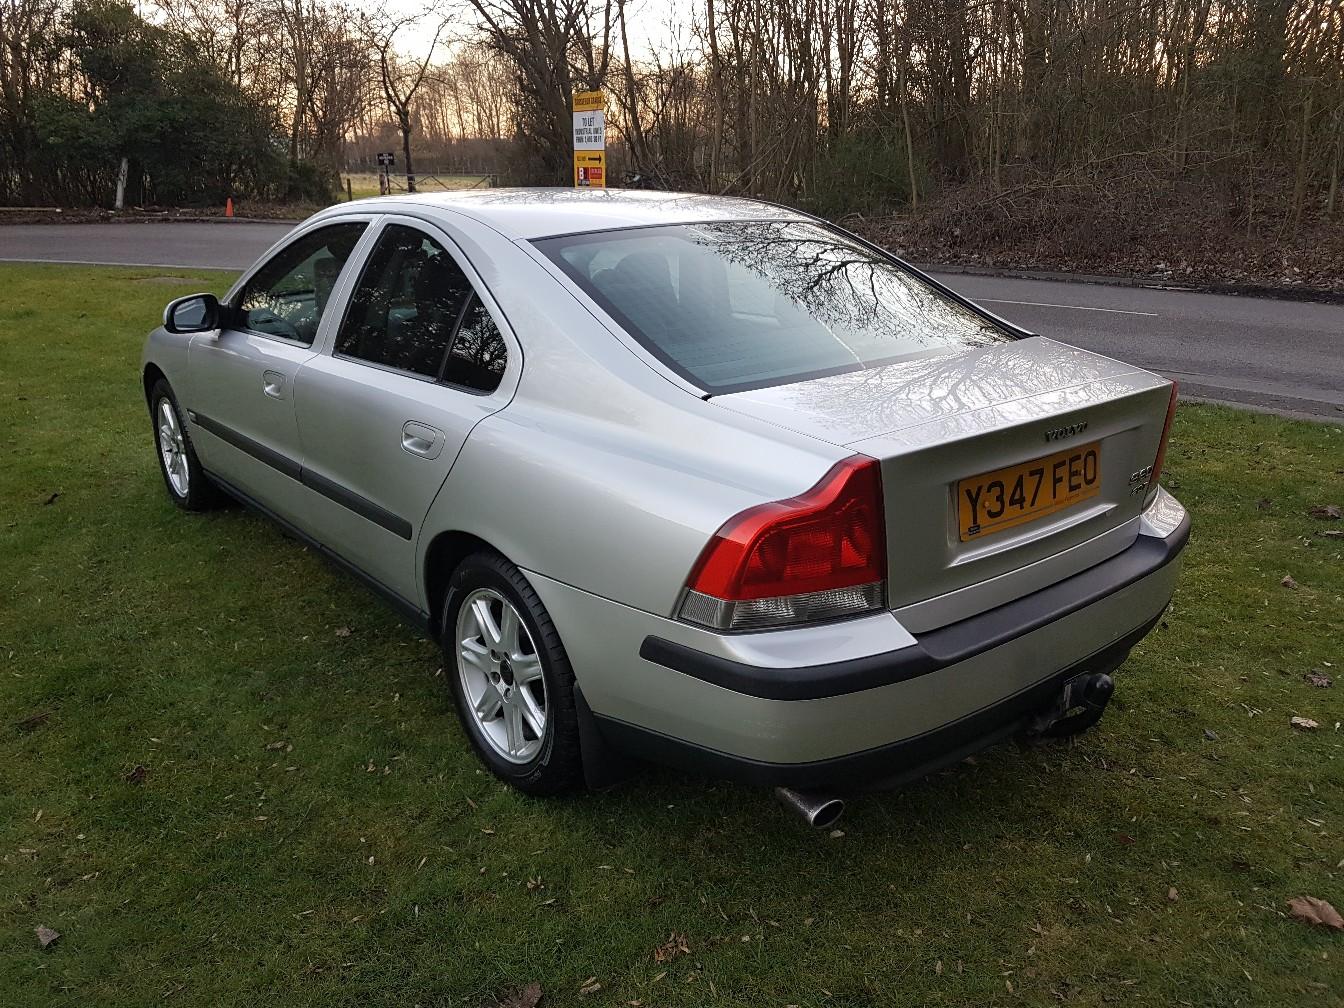 2001 Volvo S60 2.0T S 5dr saloon in Croft for £795.00 for